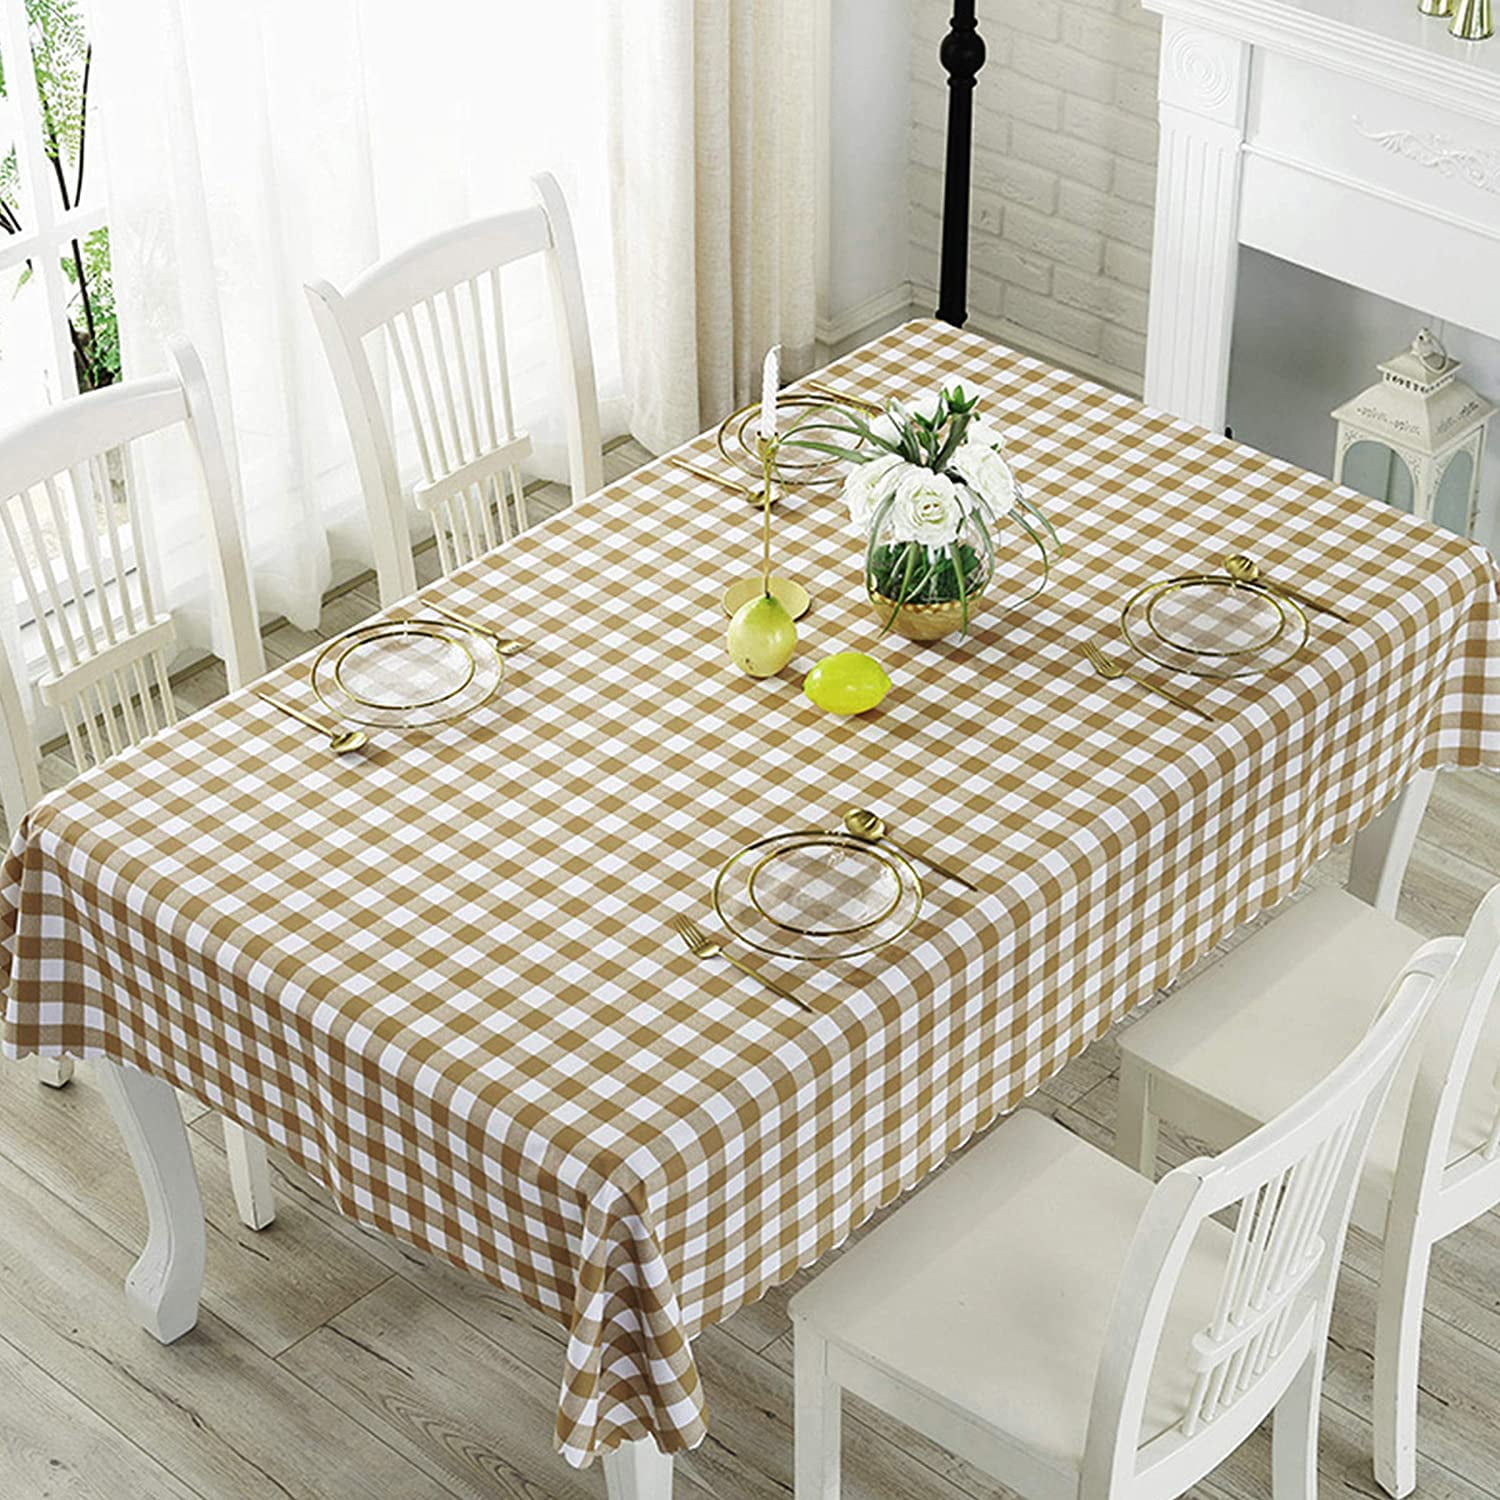 Tablecloths 54 x 72 Inch Waterproof Stain Resistant Line Plaid Abstract Polyester Rectangular Table Cover for Outdoor Picnic Kitchen Dining